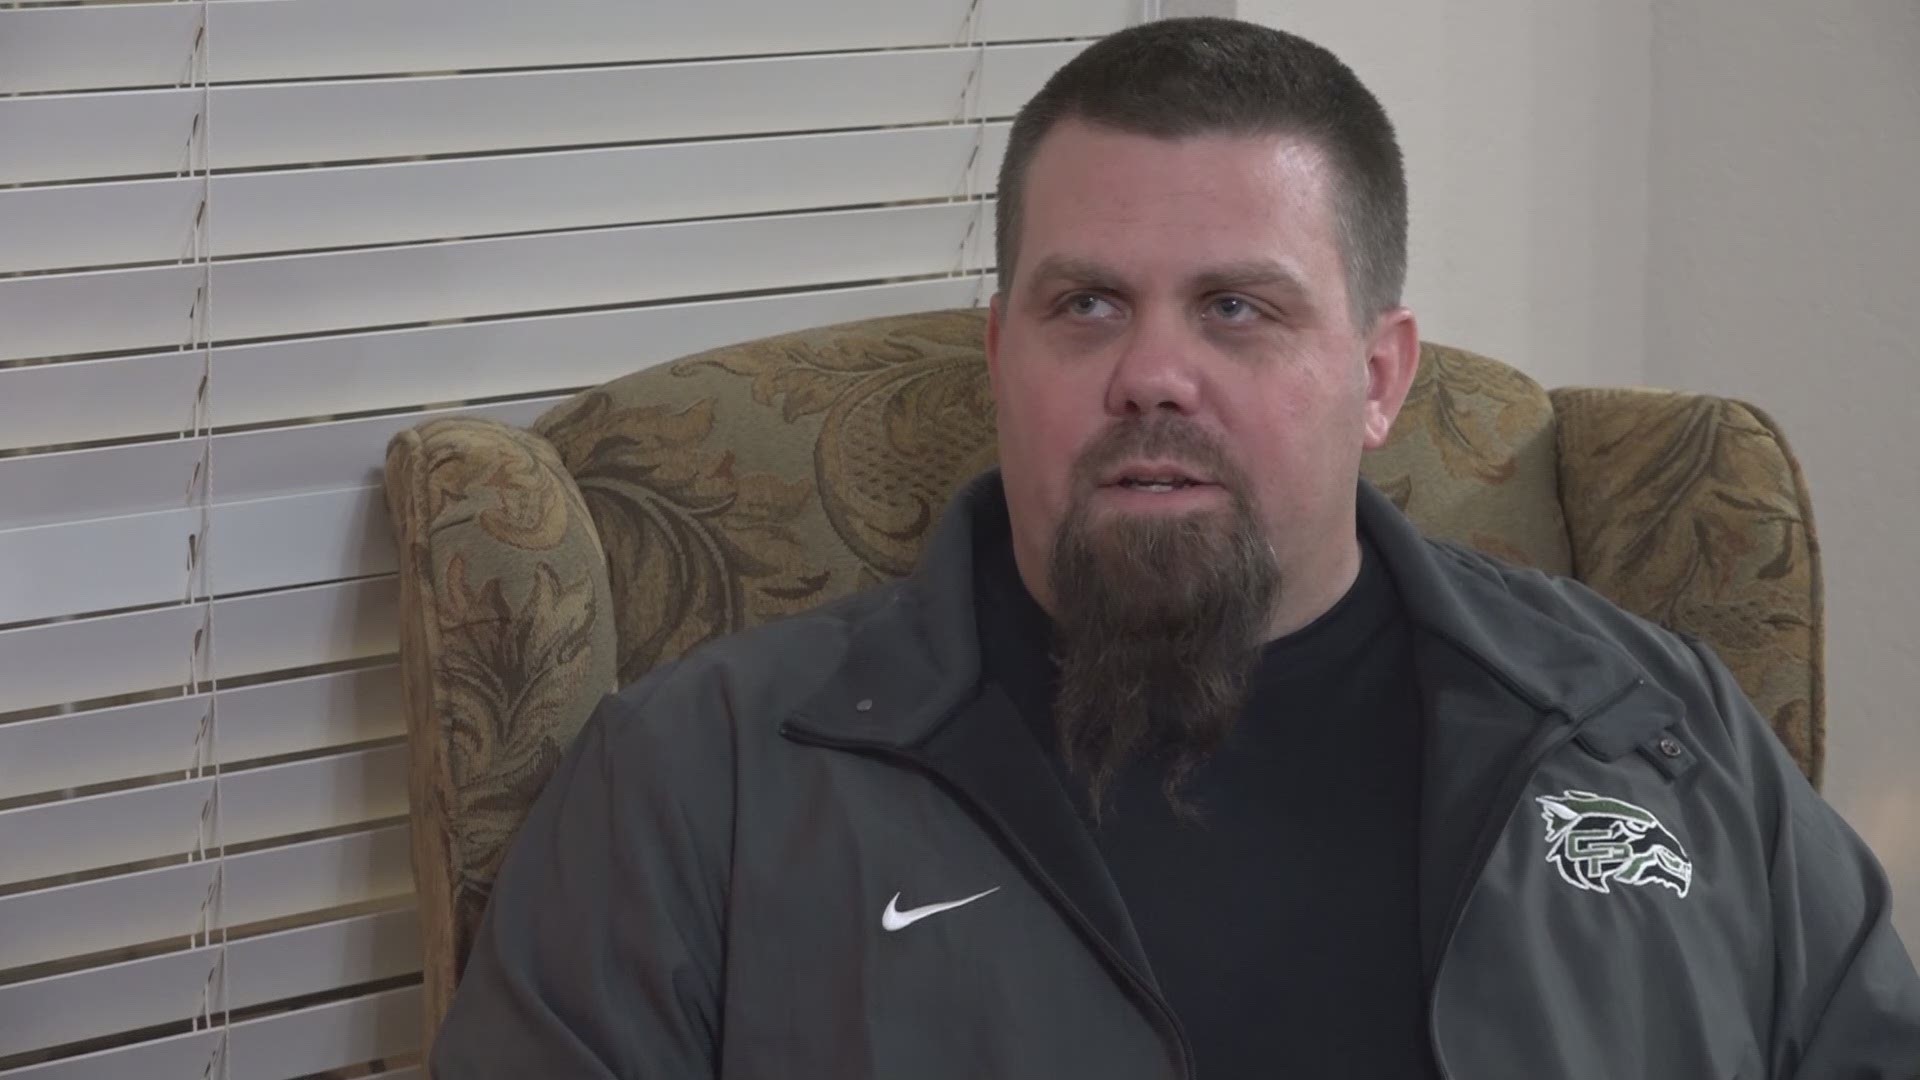 The friends and family of Running Brushy Middle School Coach Adam Shane Ladner are making their voices heard after he was killed in a shooting that allegedly began over a neighborly noise complaint.